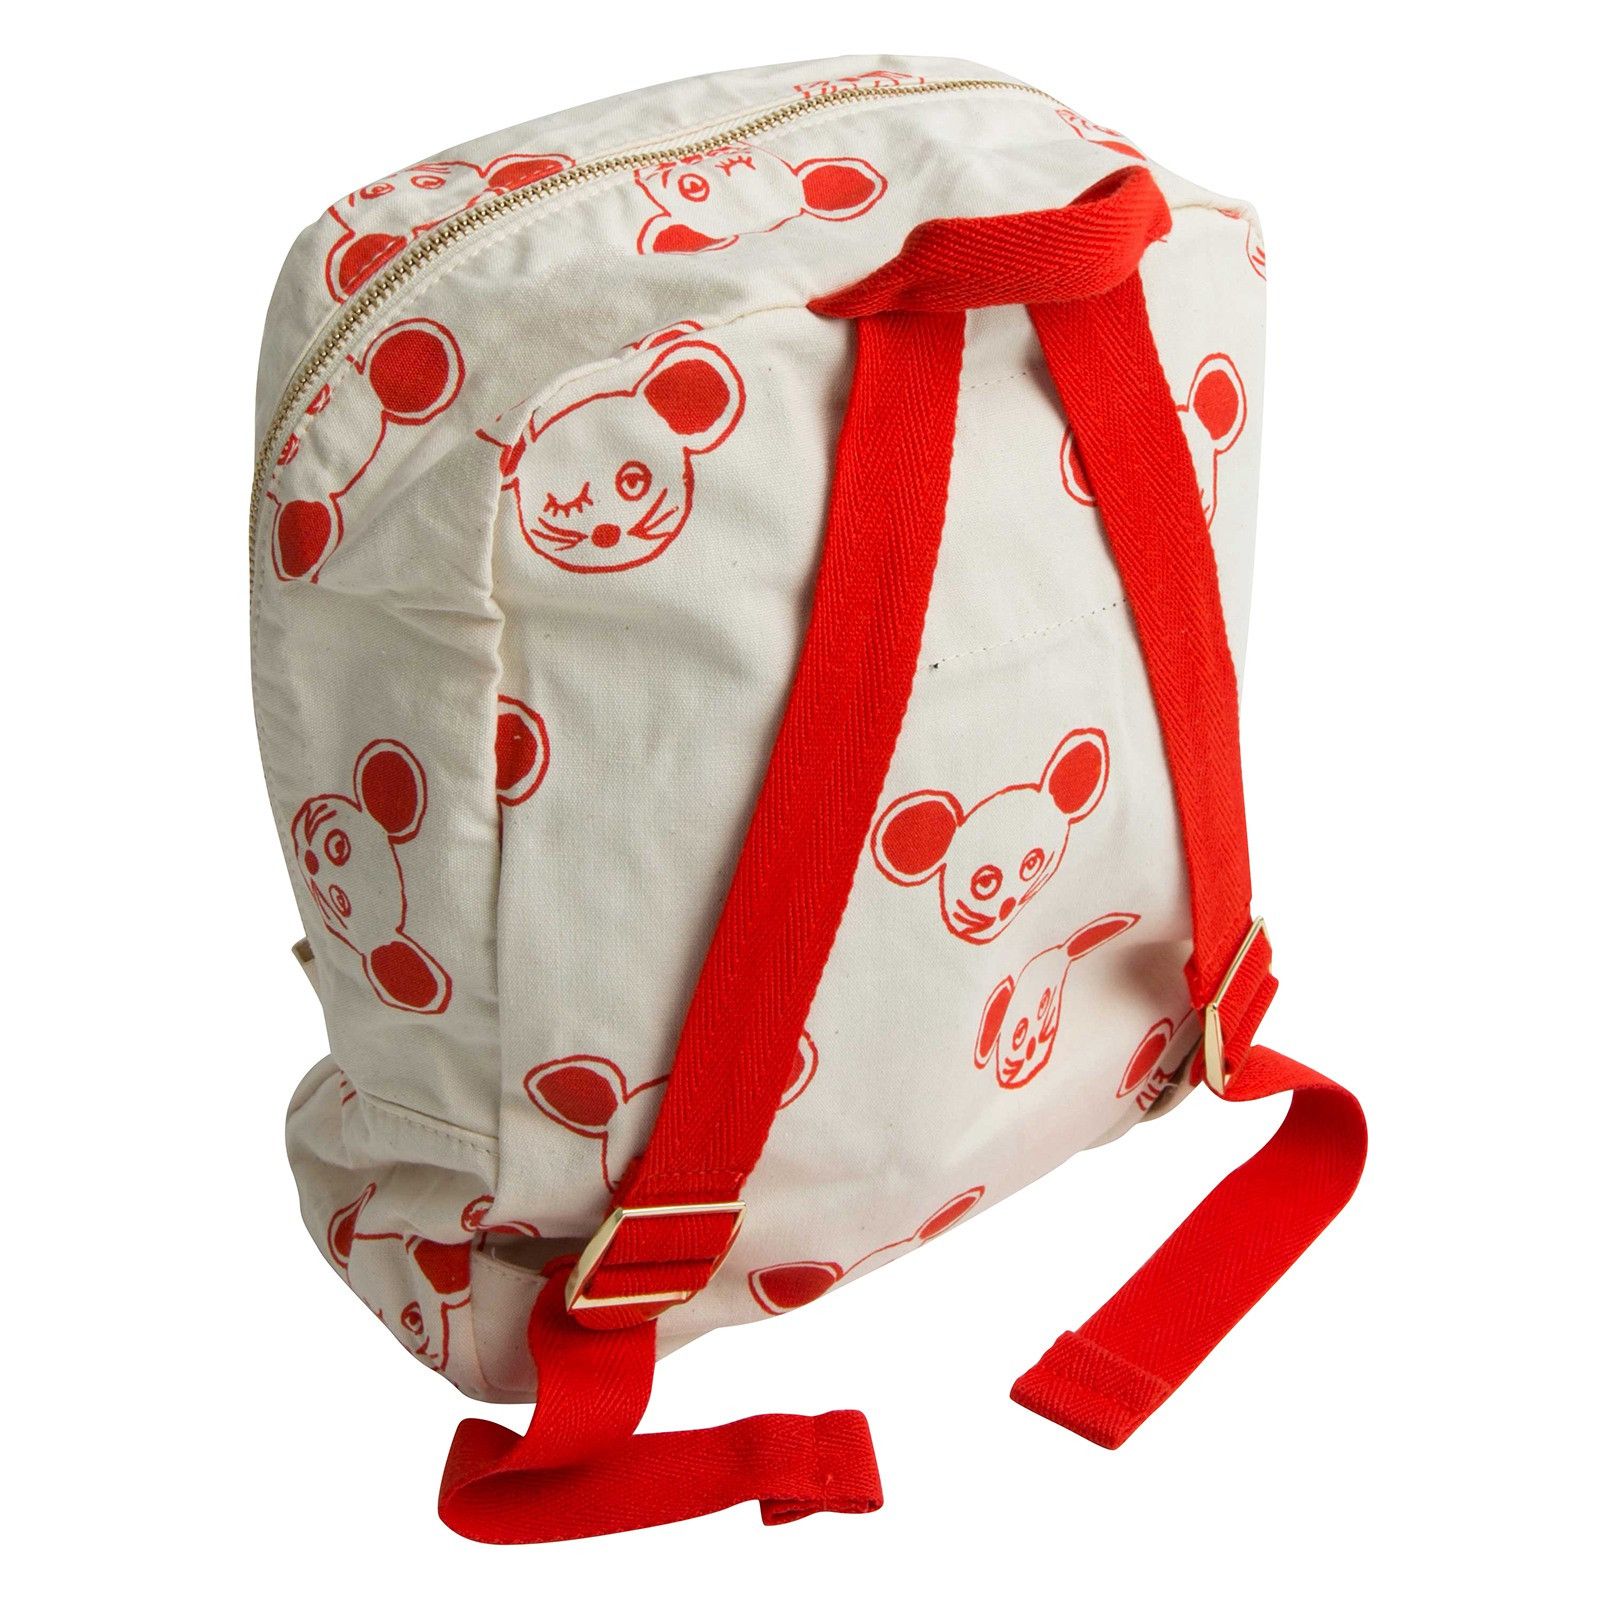 Boys&Girls White Cotton Backpack With Red Mouse Print - CÉMAROSE | Children's Fashion Store - 2